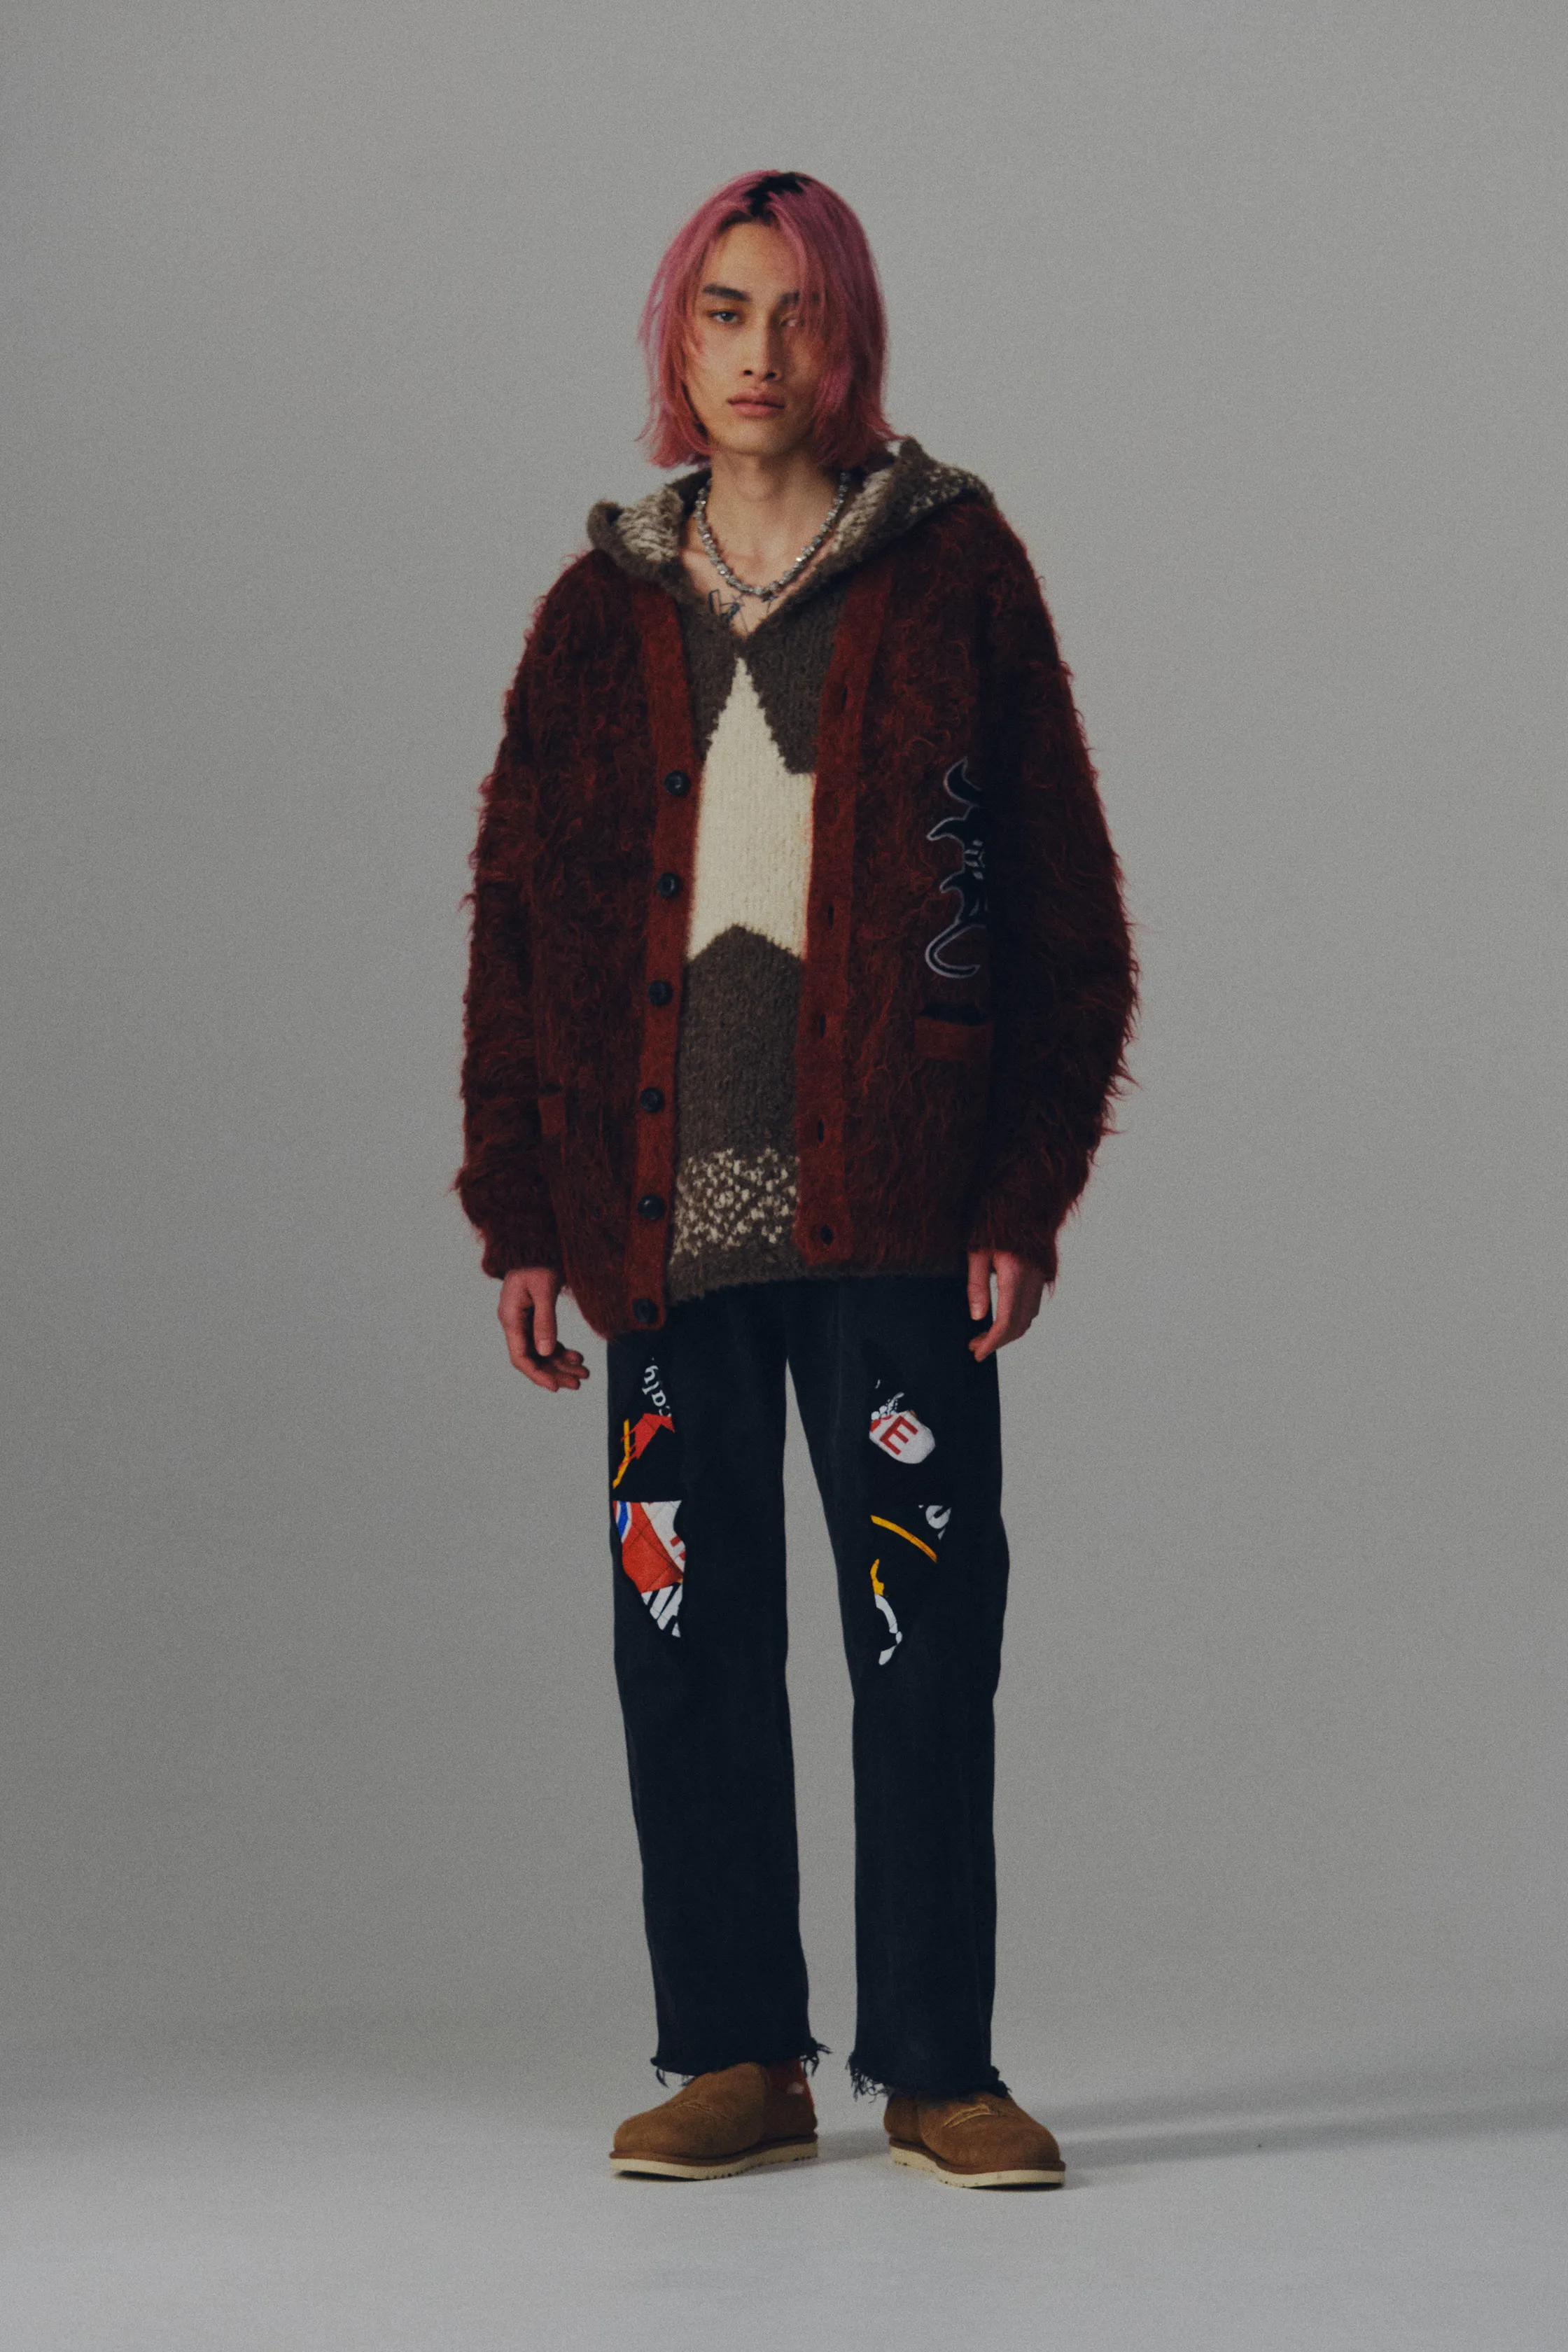 00023-Children-of-the-Discordance-Mens-Fall-22-credit-brand.png